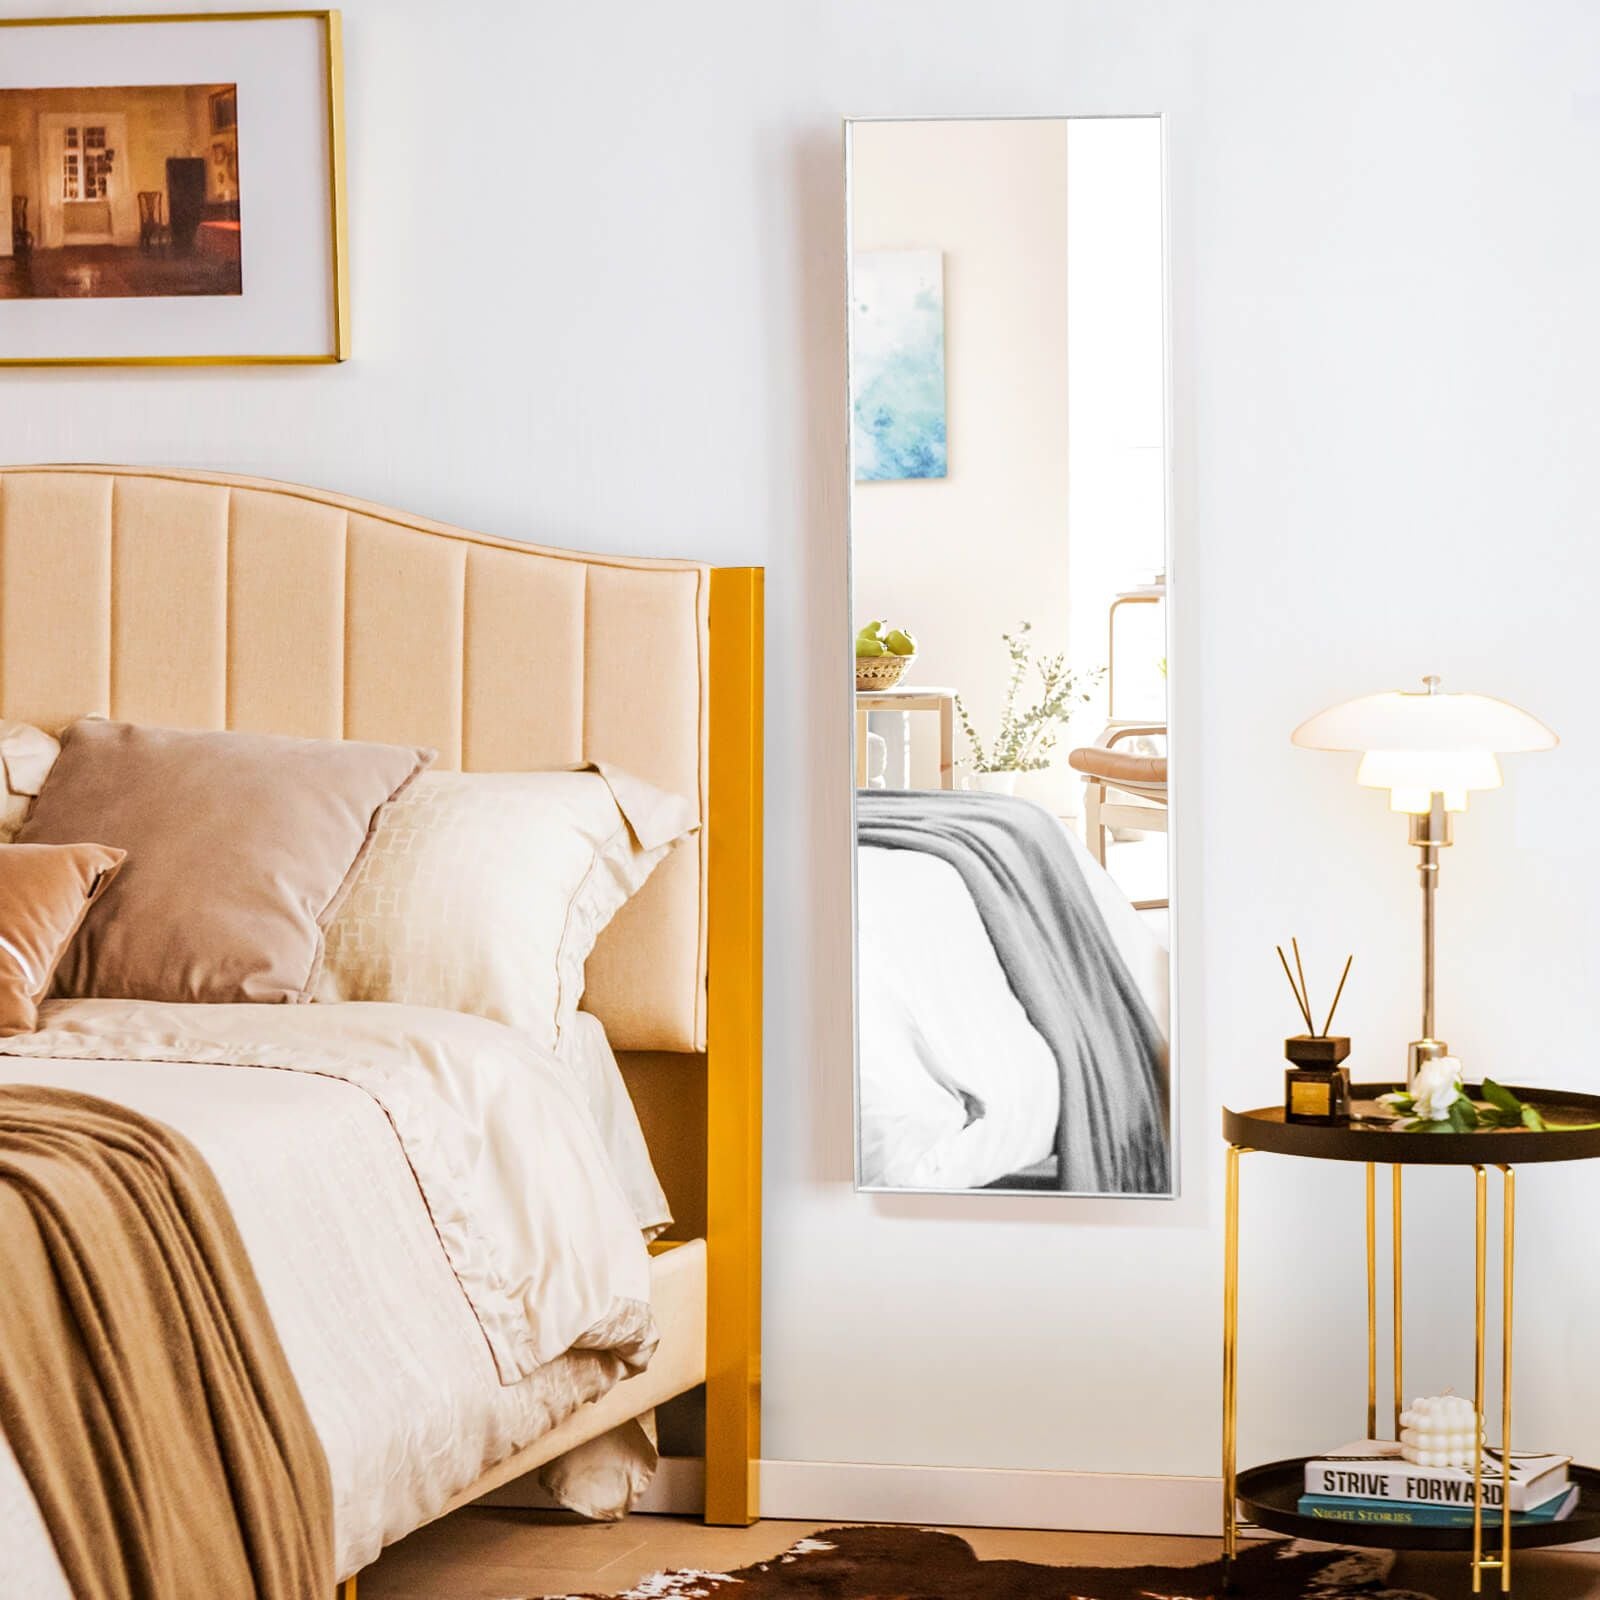 120 X 37 Cm Full Length Wall Hanging Mirror with Adjustable Hook